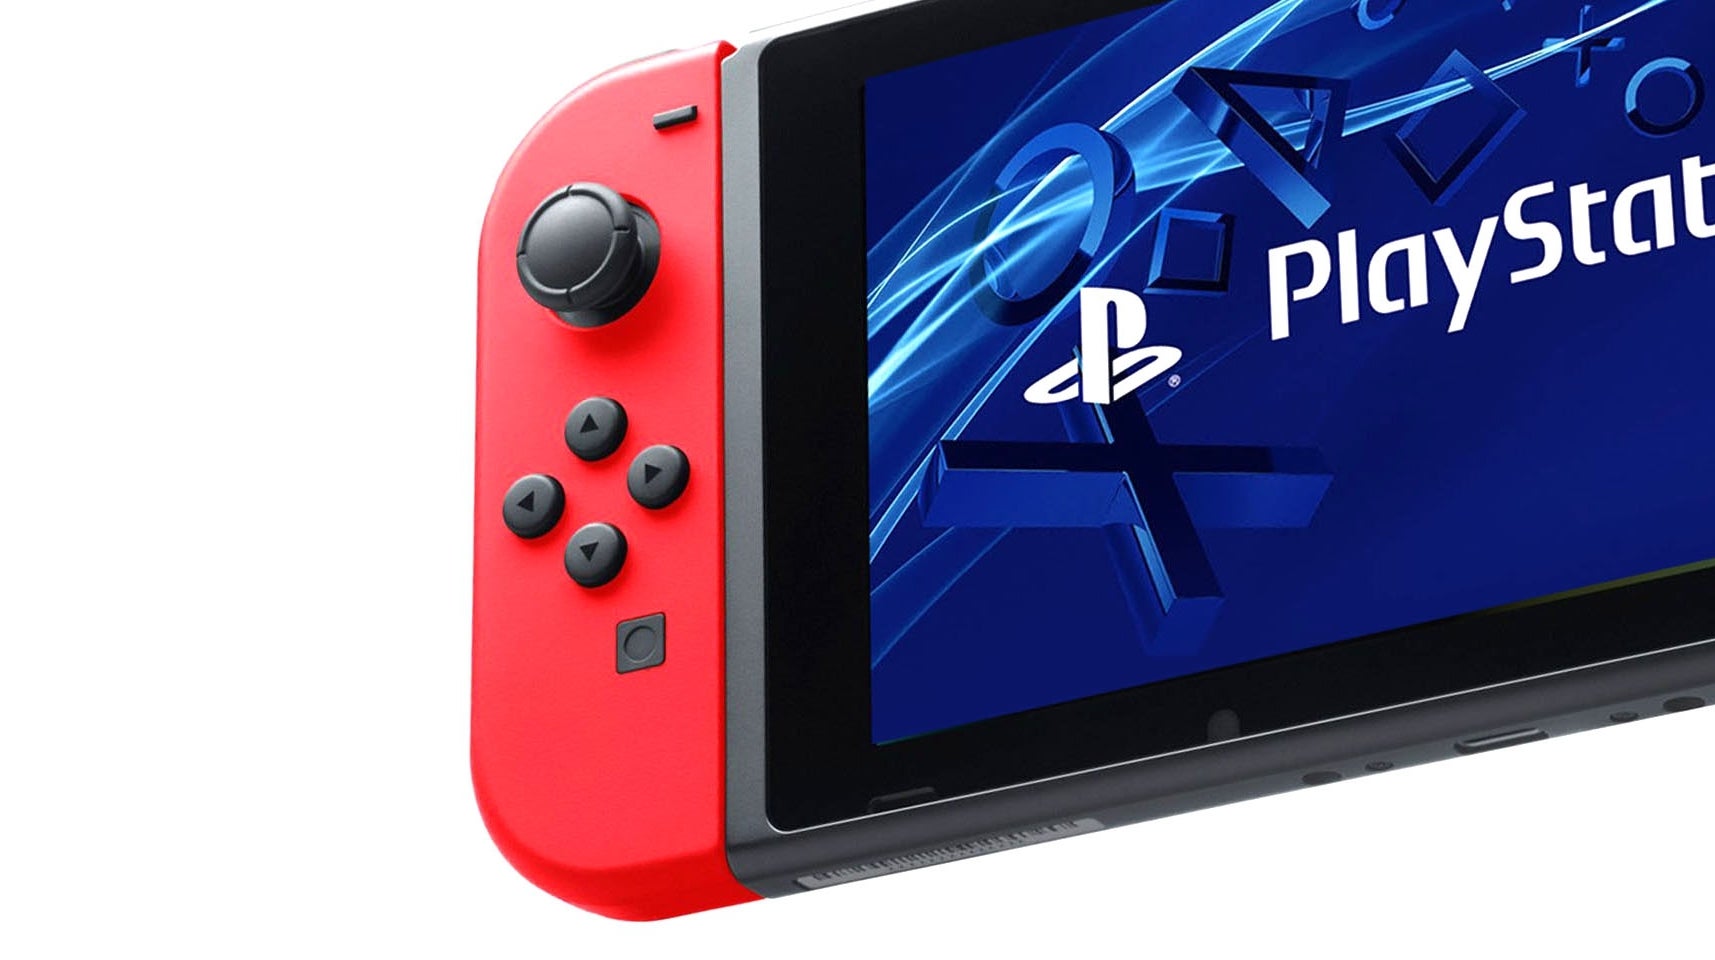 In Theory: Could Sony produce a PS4 Switch-style console hybrid 